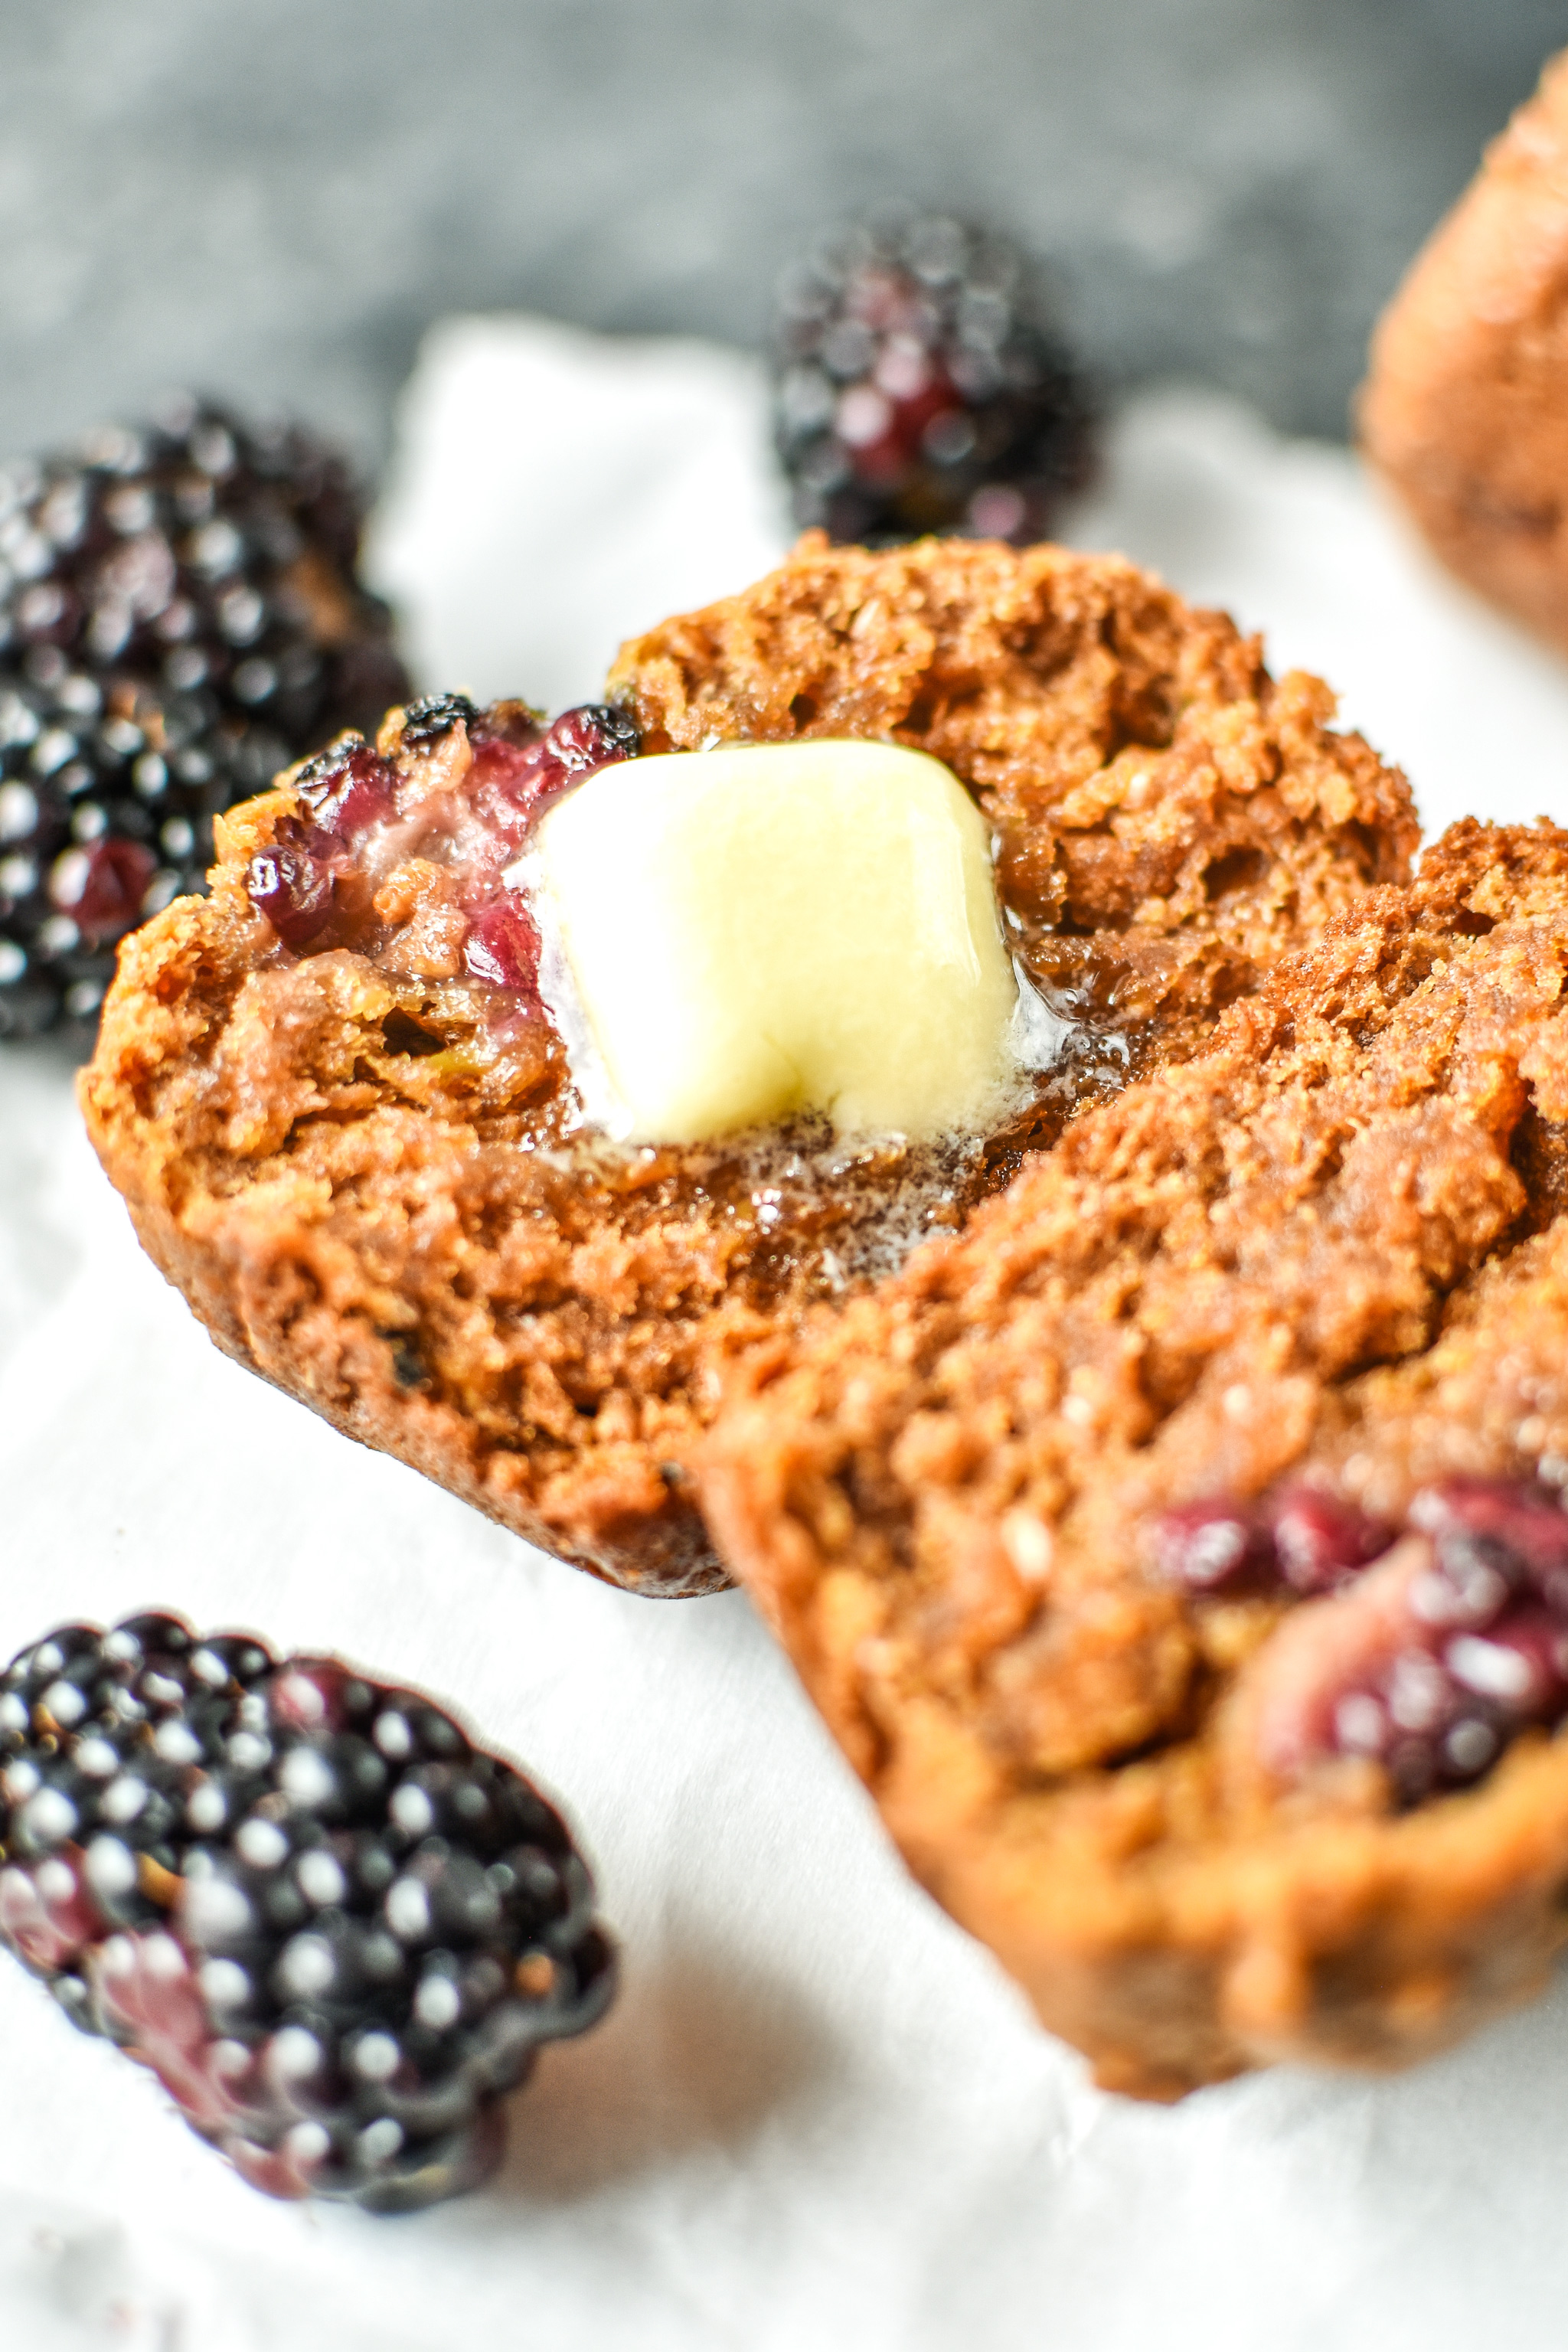 A slab of butter melting on a fresh baked blackberry bran muffin.